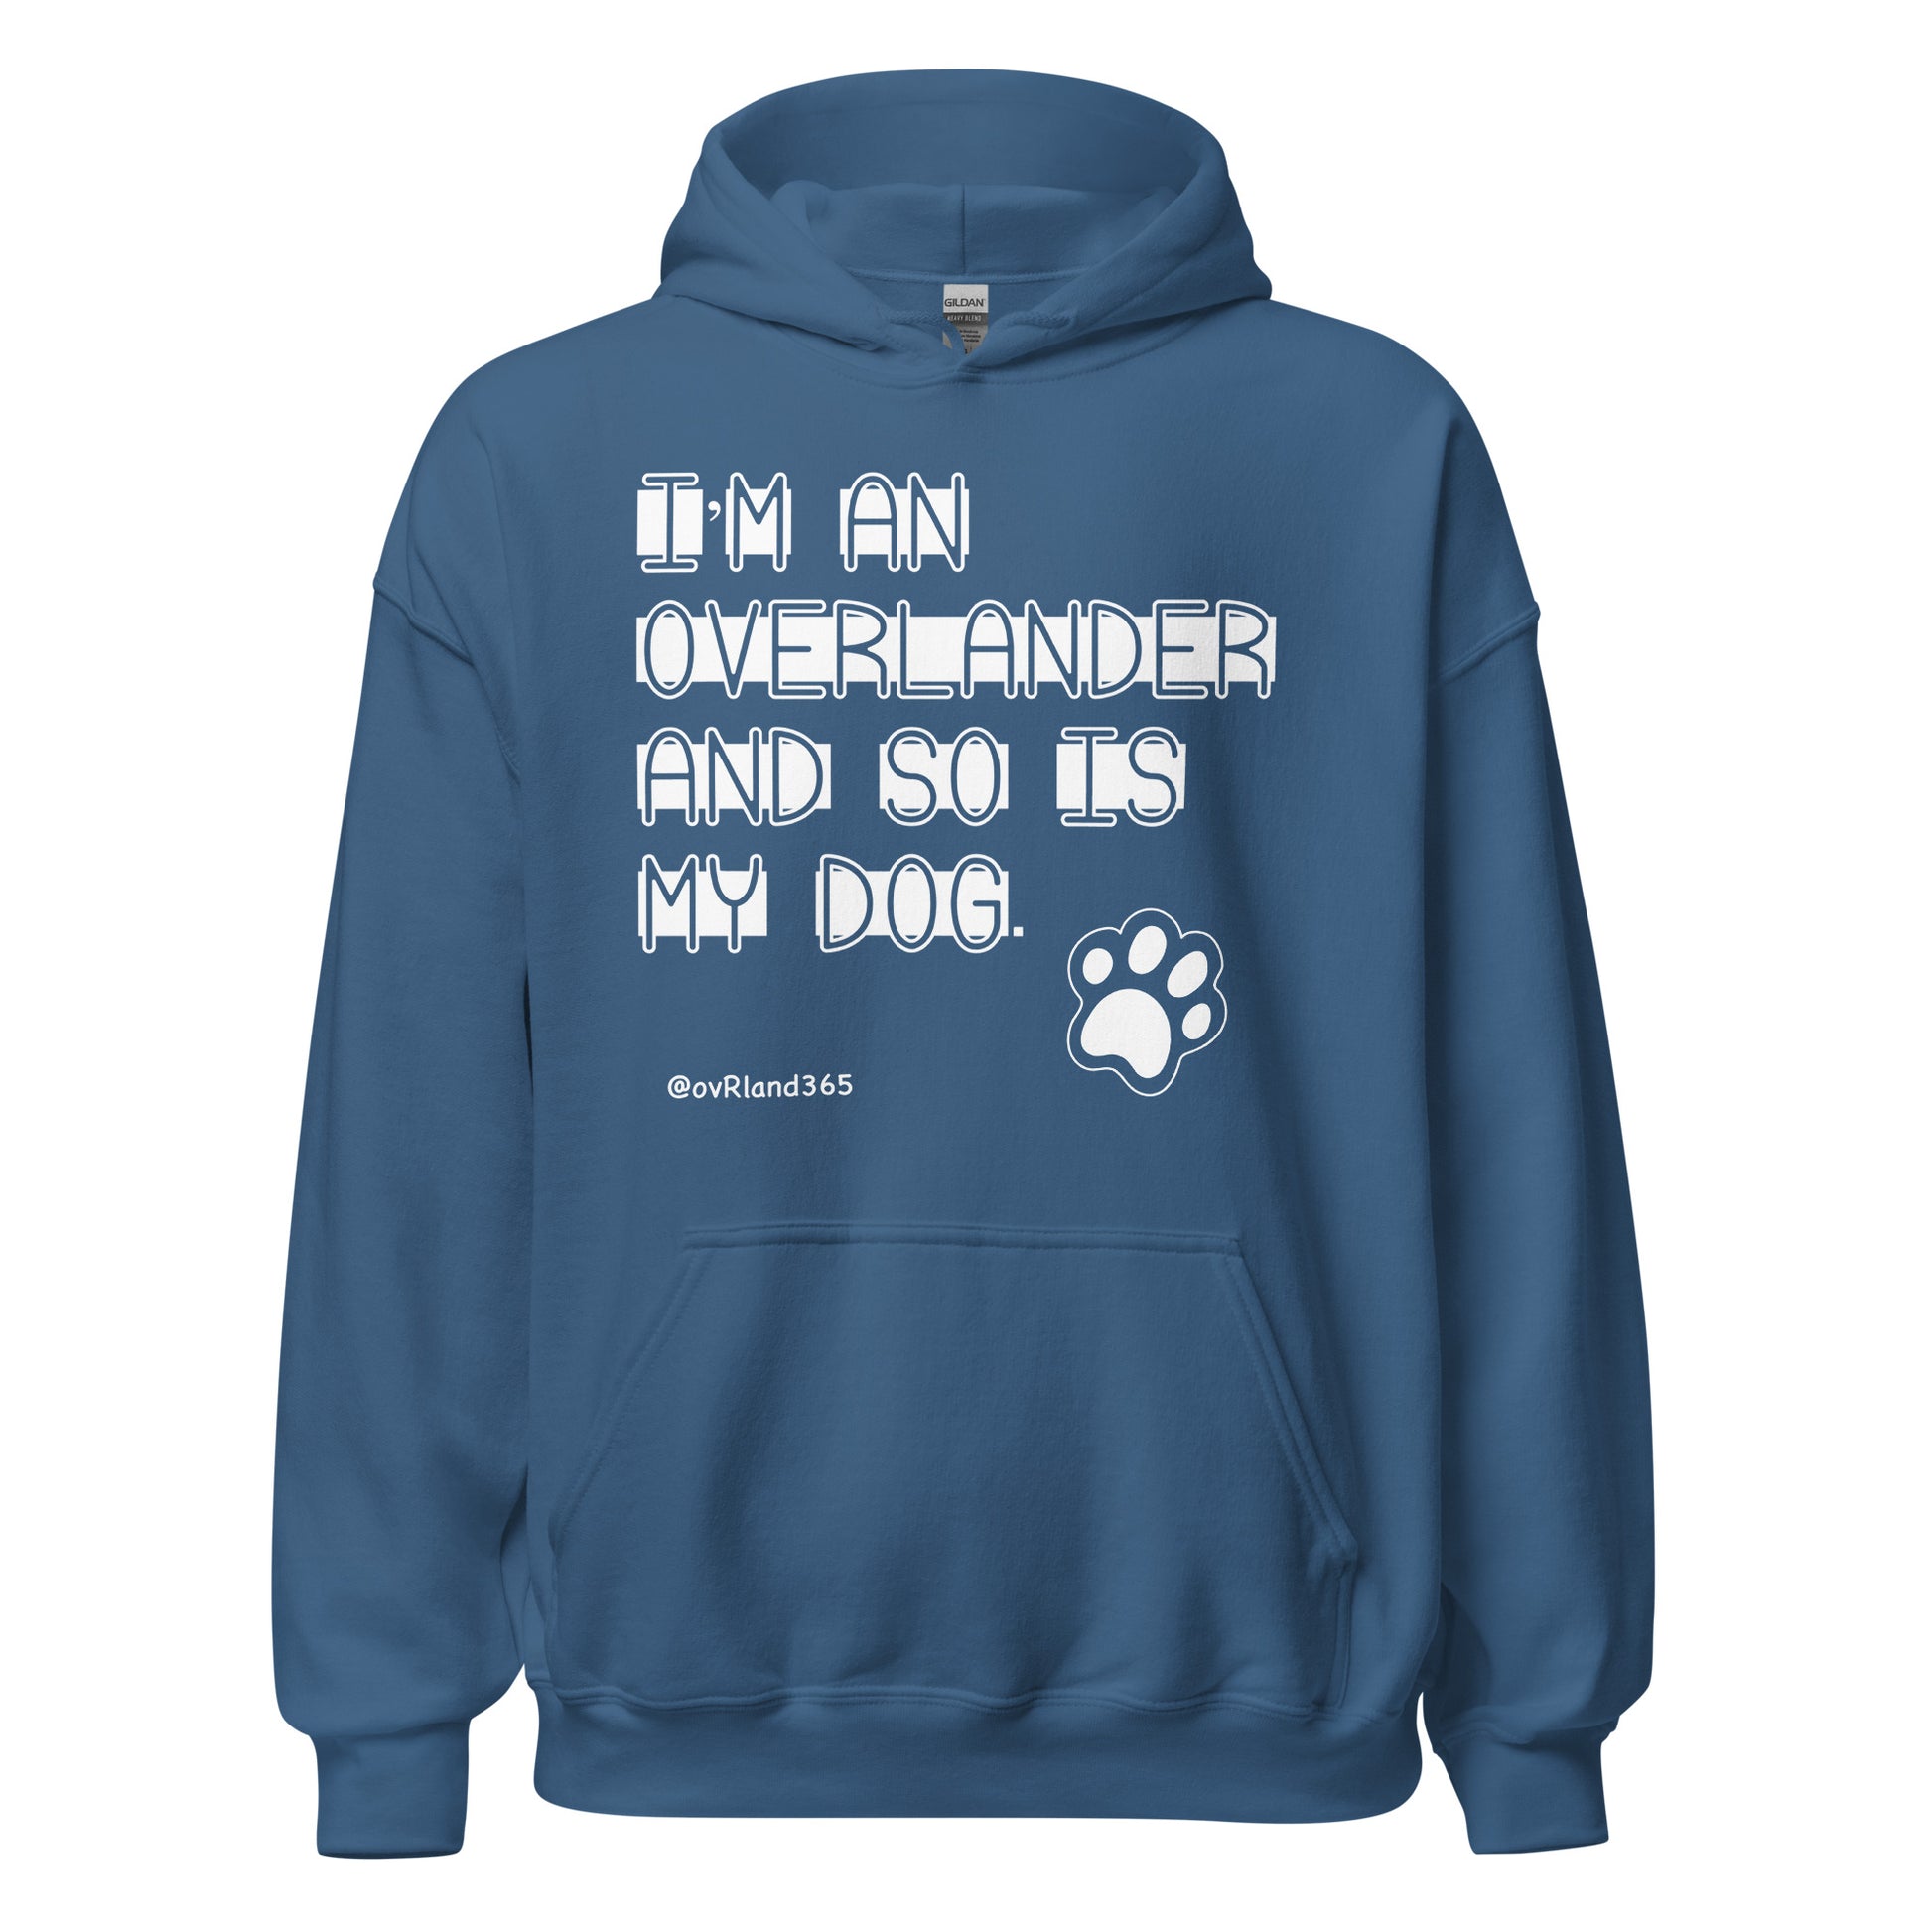 I'M AN OVERLANDER AND SO IS MY DOG. Indigo Blue Hoodie with a paw print. overland365.com